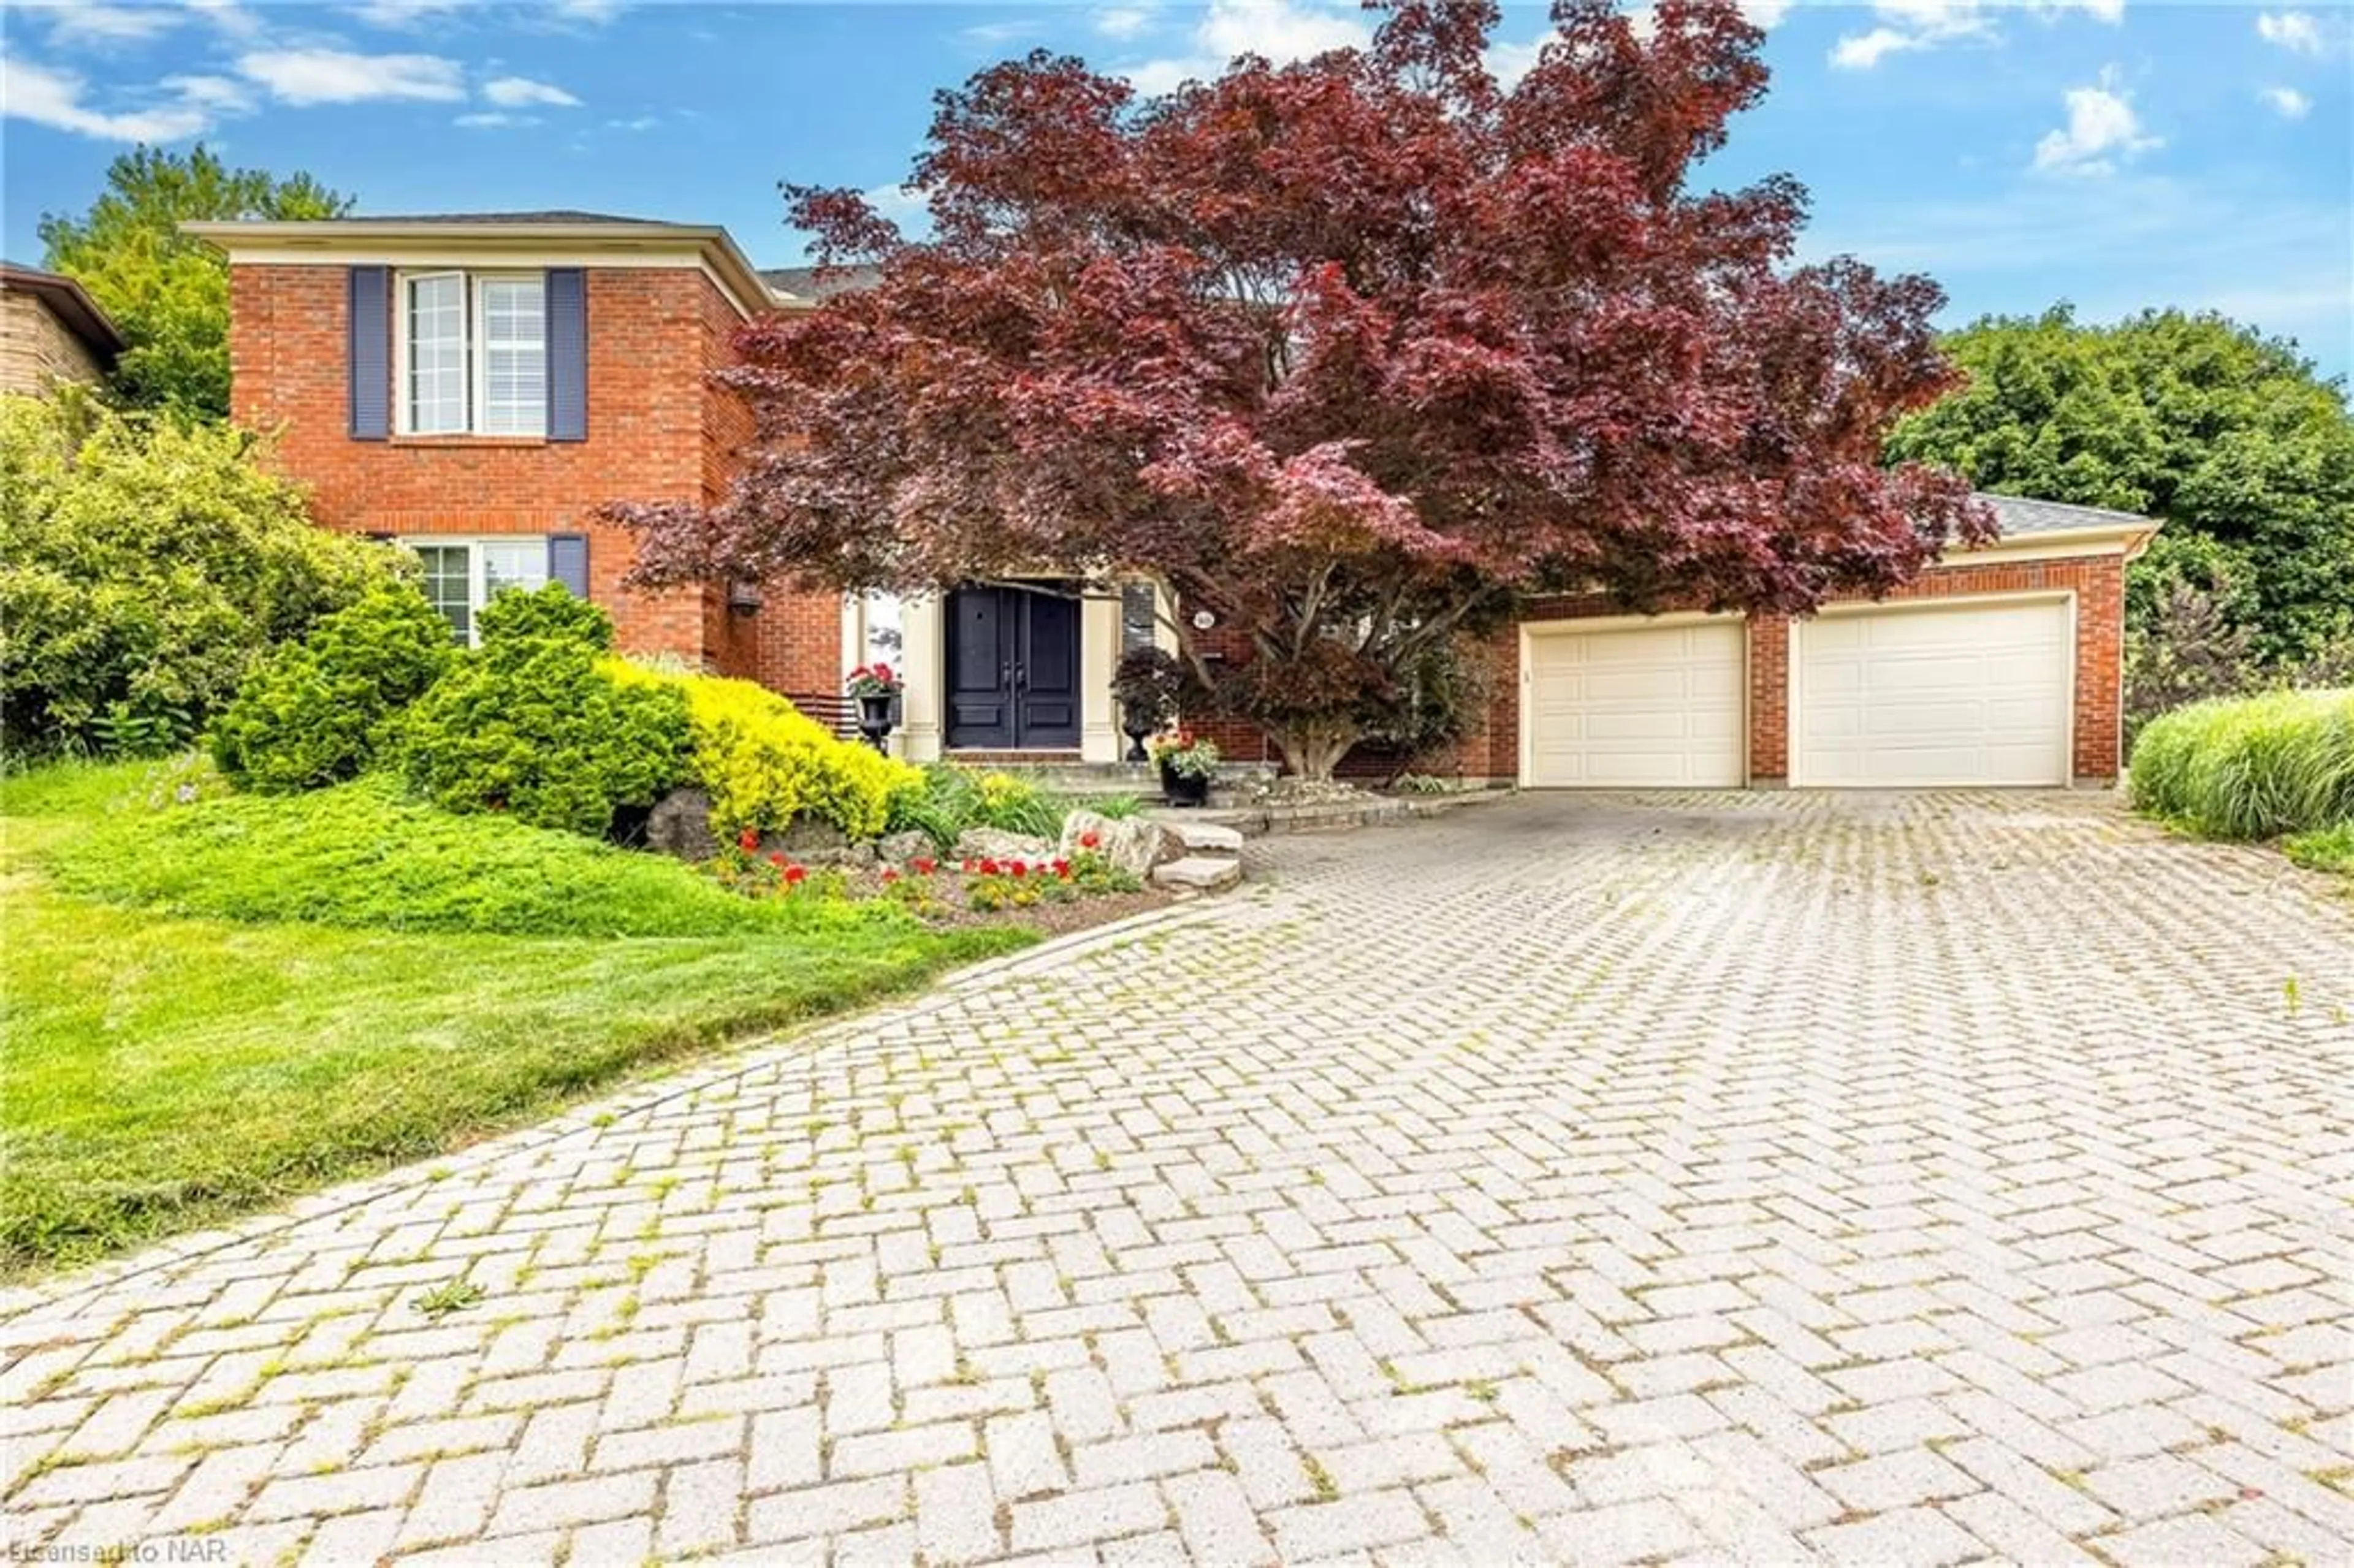 Home with brick exterior material for 48 Ridge Point Dr, St. Catharines Ontario L2T 2T1